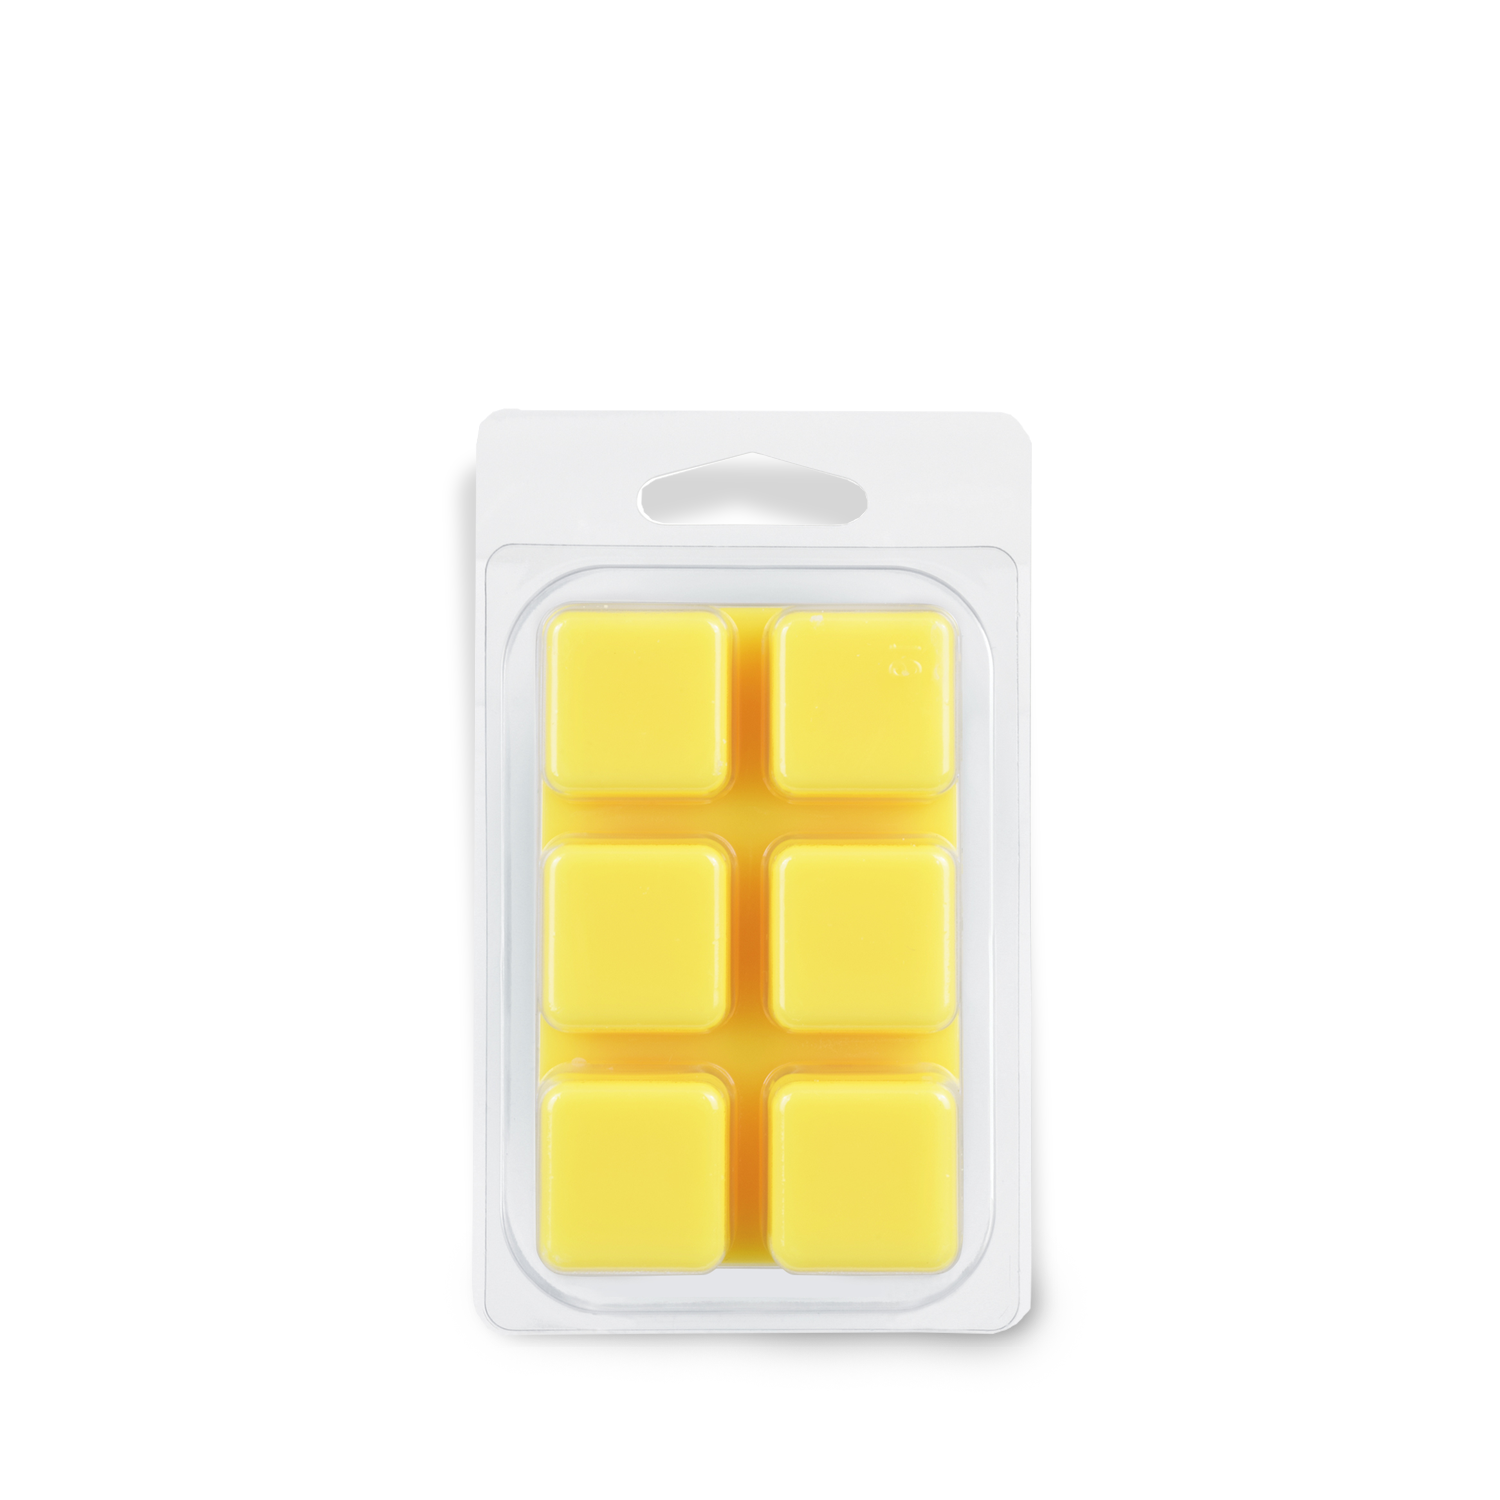 A pack of Magnolia Sunset scented wax melt cubes from Tuscany Candle® SEASONAL on a white background.